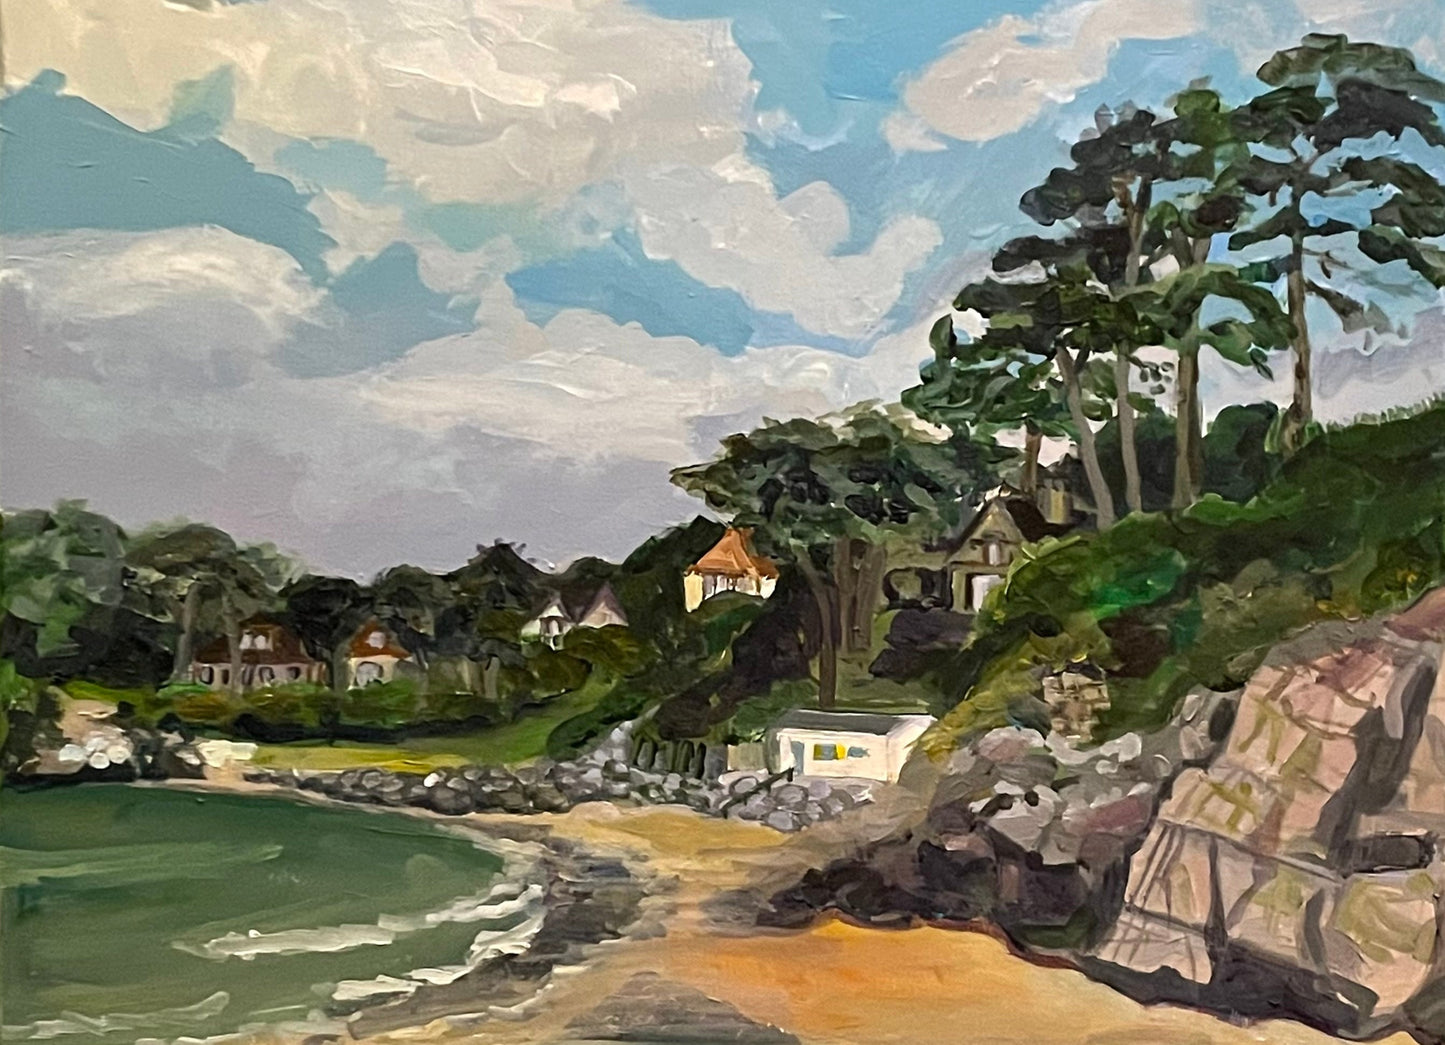 Painting of Caswell Bay in the Gower, Wales with white clouds in a blue sky and rocks and sea in foreground with trees and houses on the headland. By Worcester Artist Margaret Powell. 